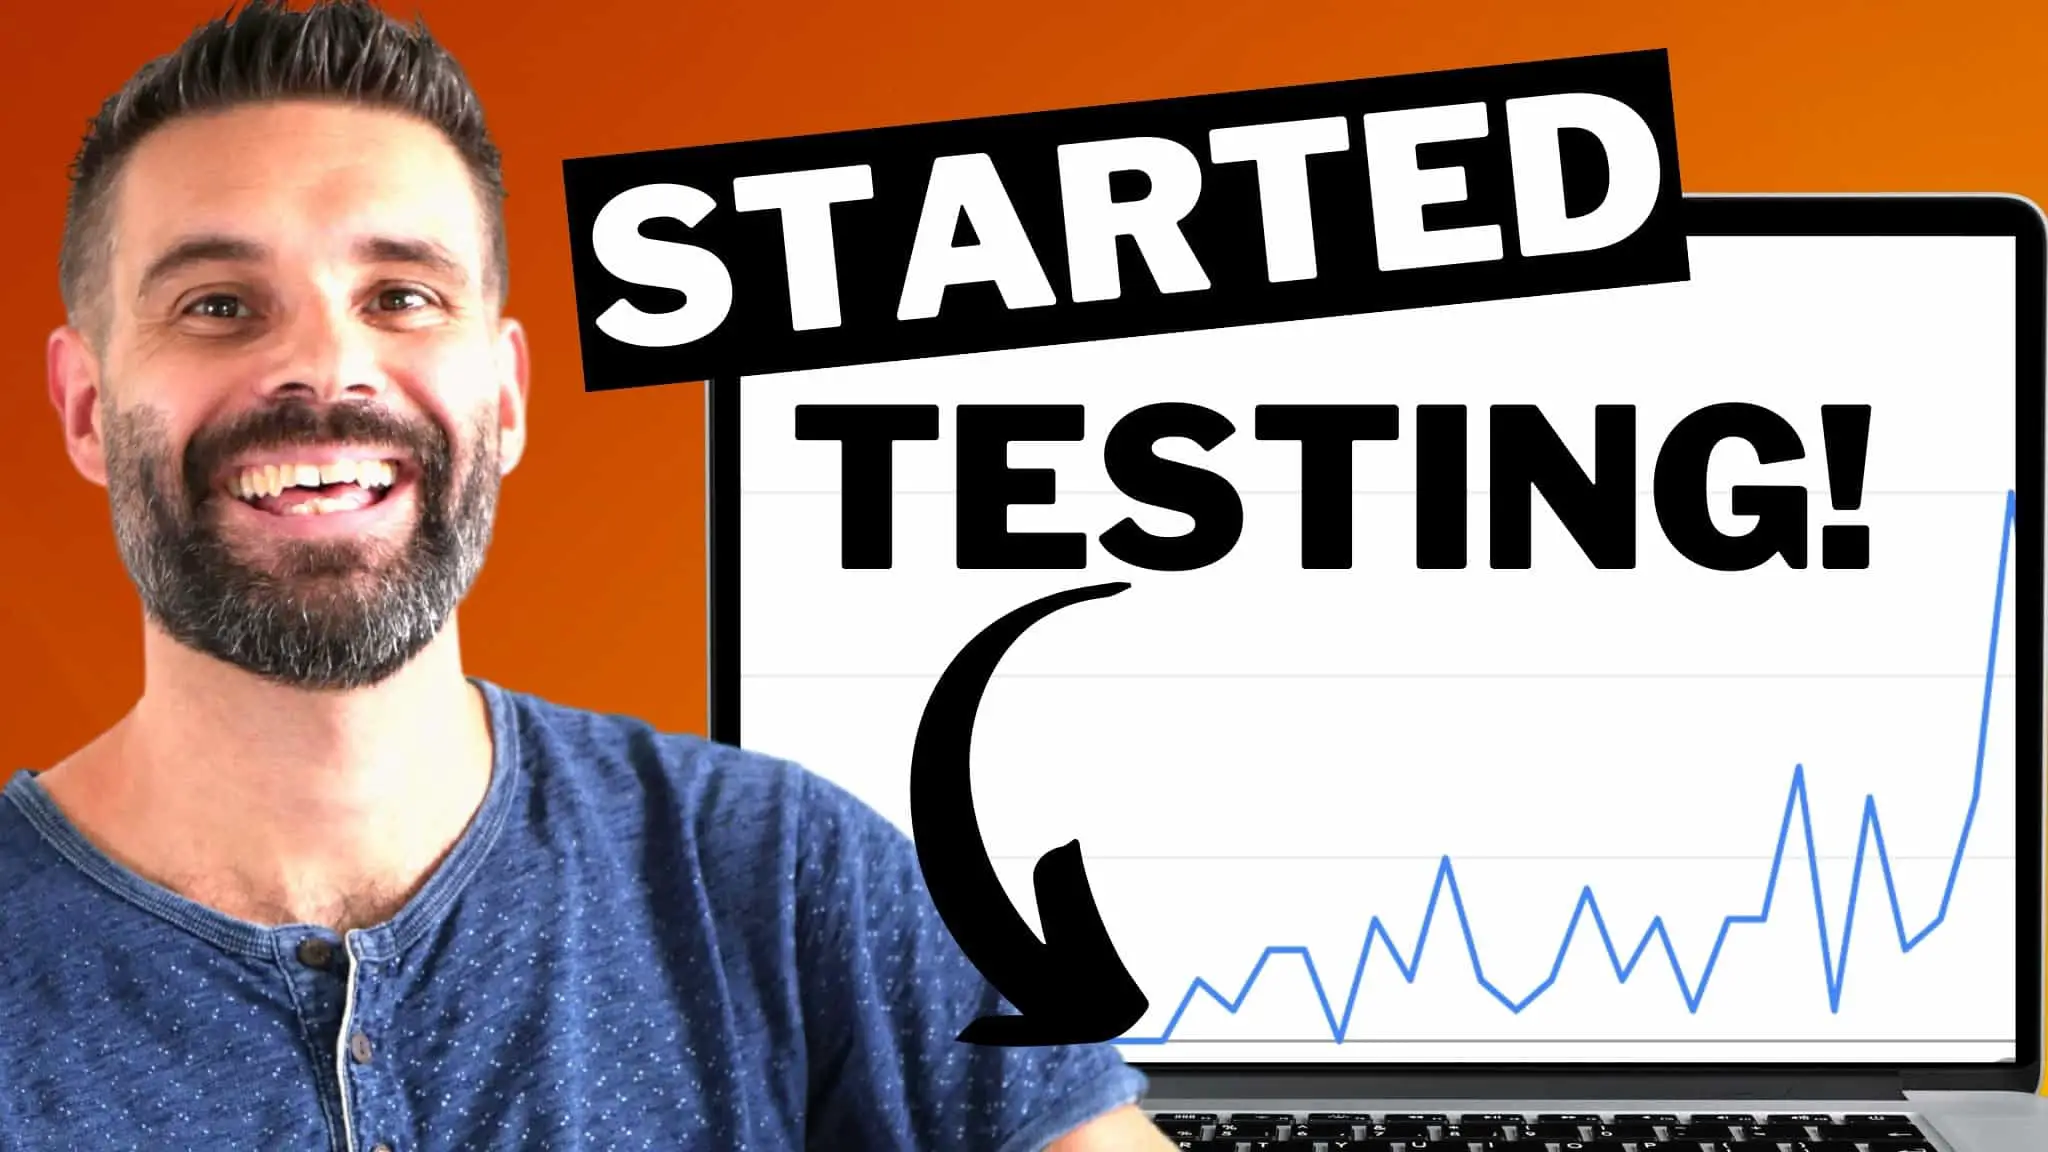 SEO Tag Tester: Testing Titles Increased My Traffic By 19%!